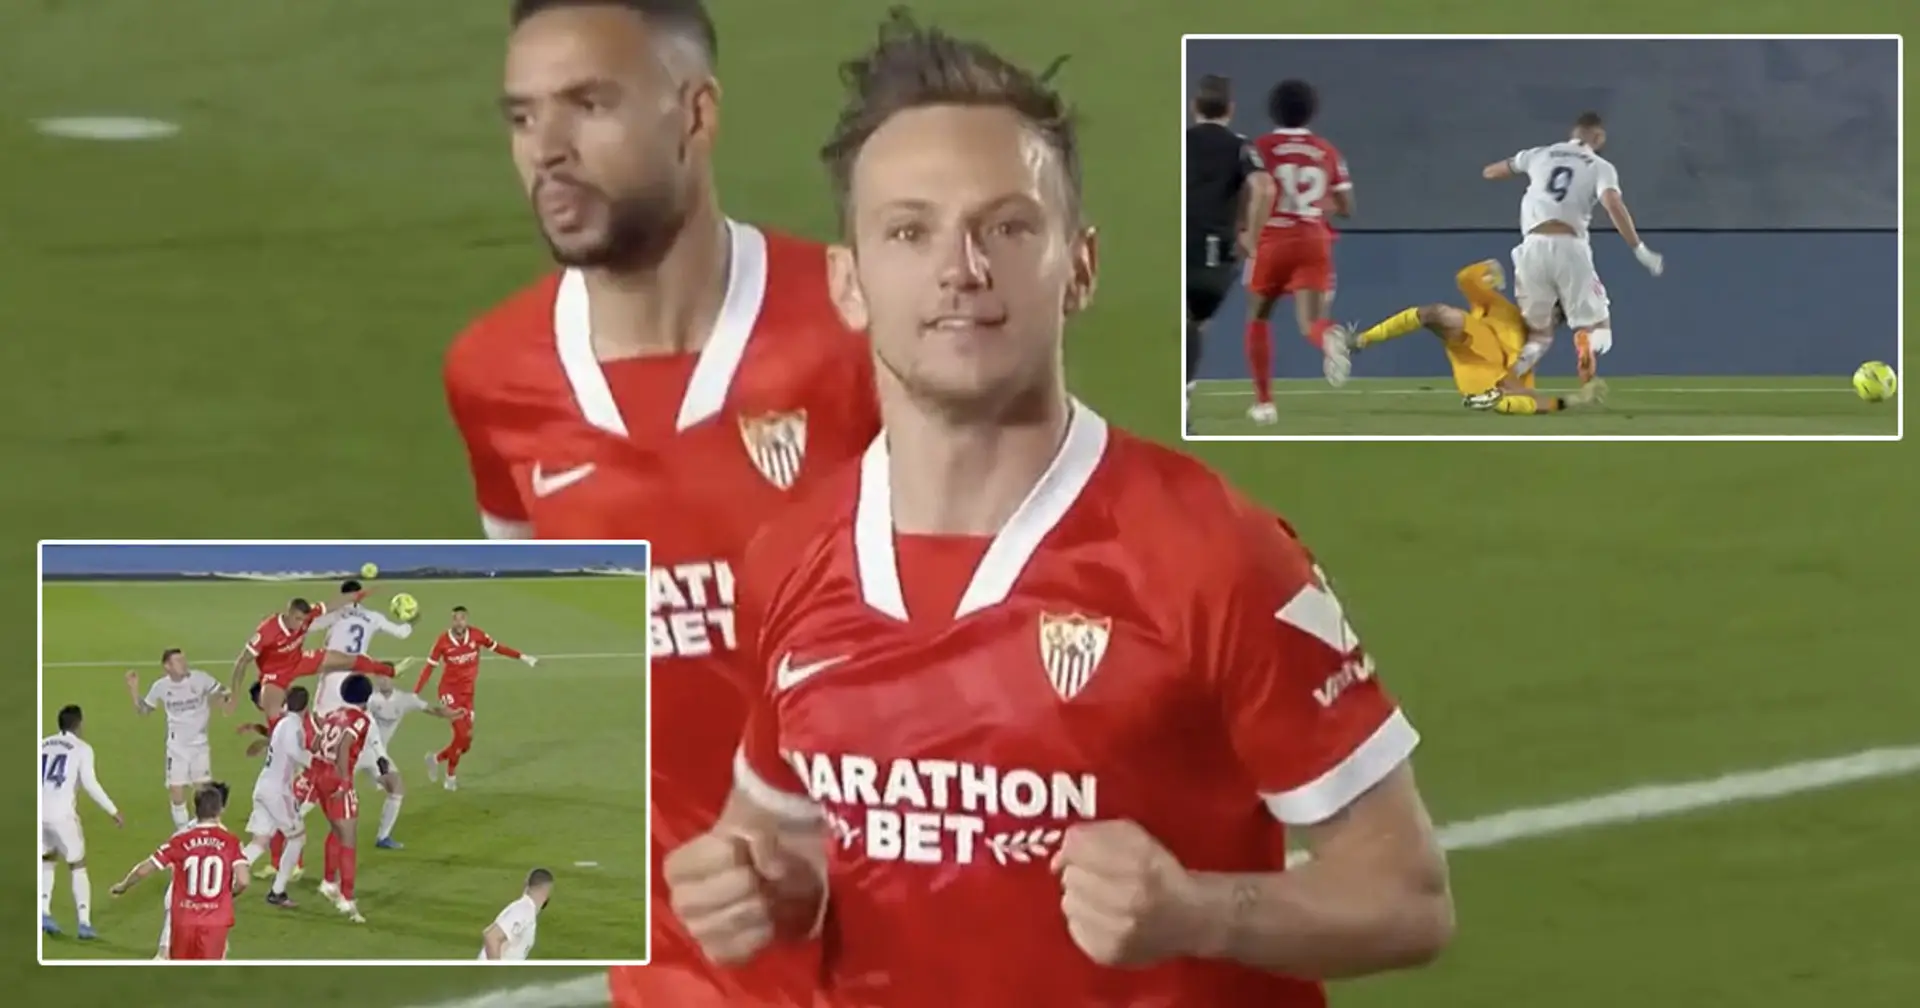 VAR overturns Madrid's penalty and gives one to Sevilla, Rakitic converts to keep Barca in the race